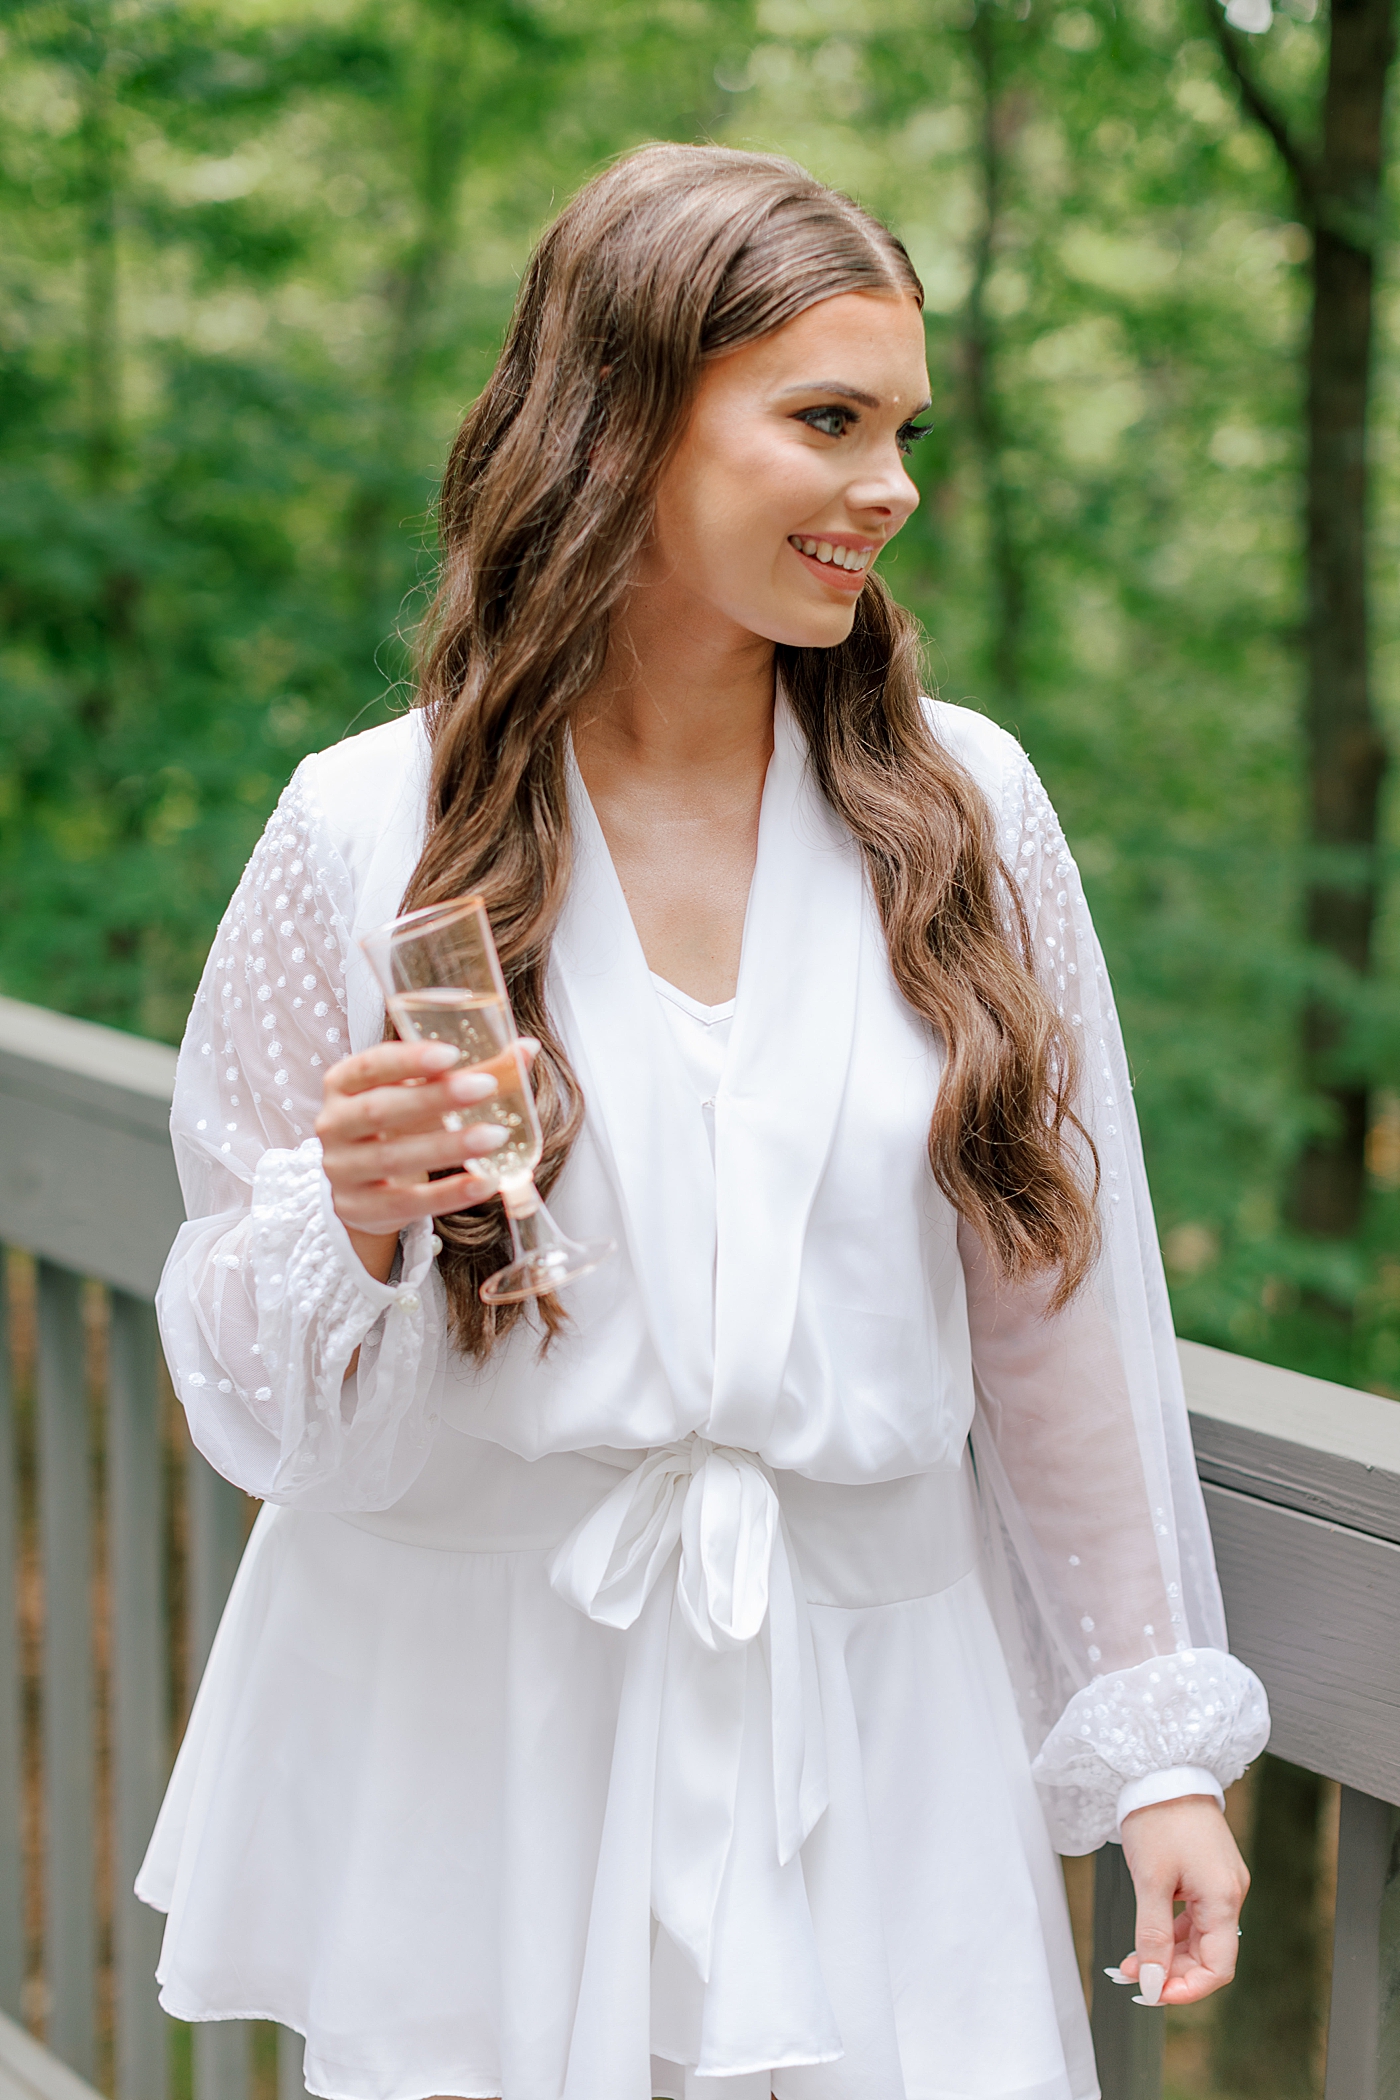 Bride in a lace robe with a champagne flute | Image by Hope Helmuth Photography 